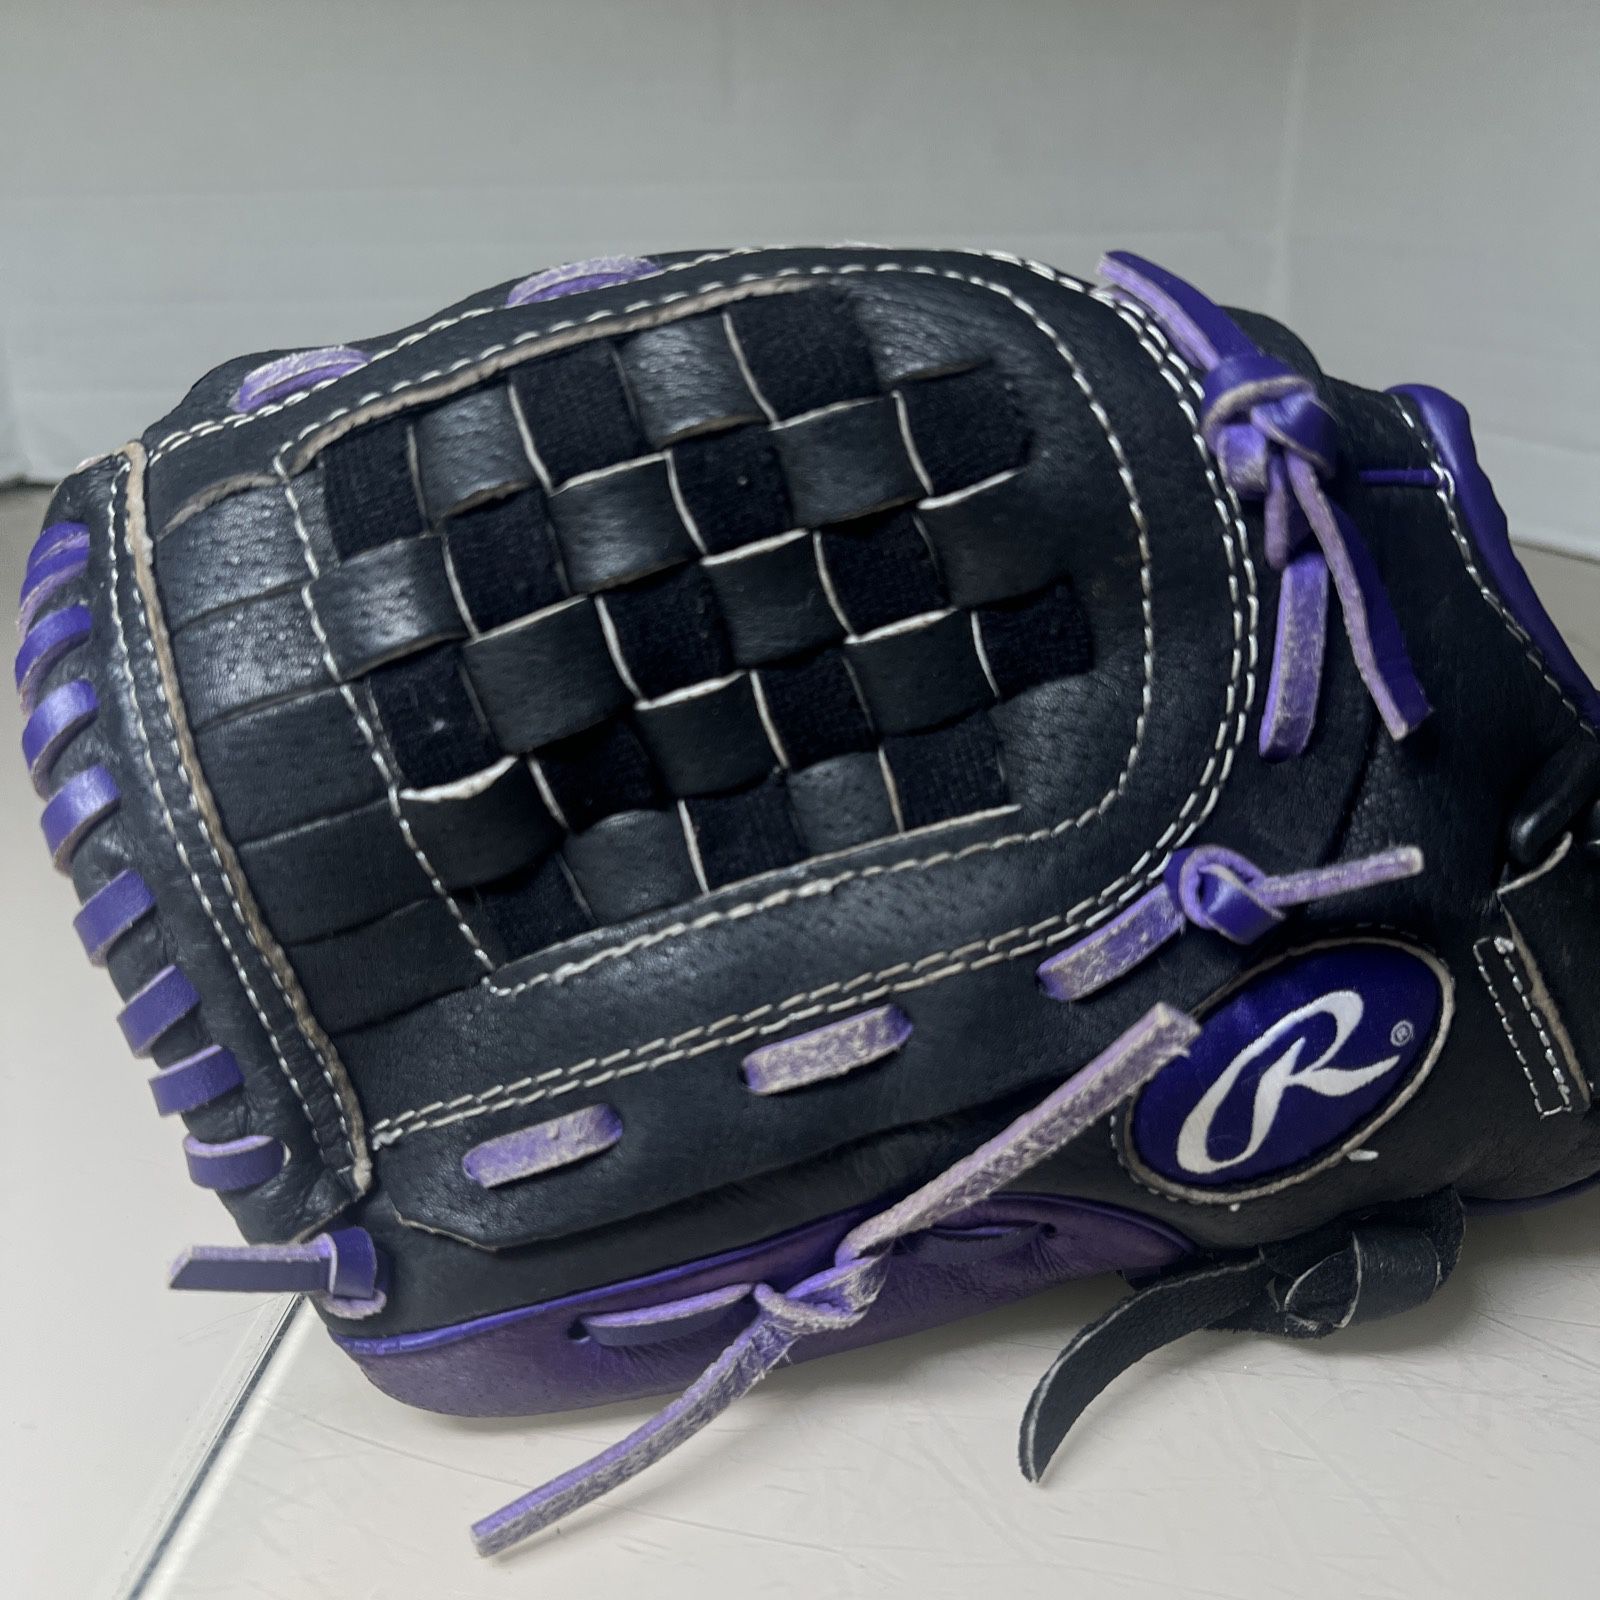 Rawlings HFP150BP RHT Purple Black Softball Leather Glove 11.5 All Leather Shell. LHT Used in very good condition with normal signs of usage. 